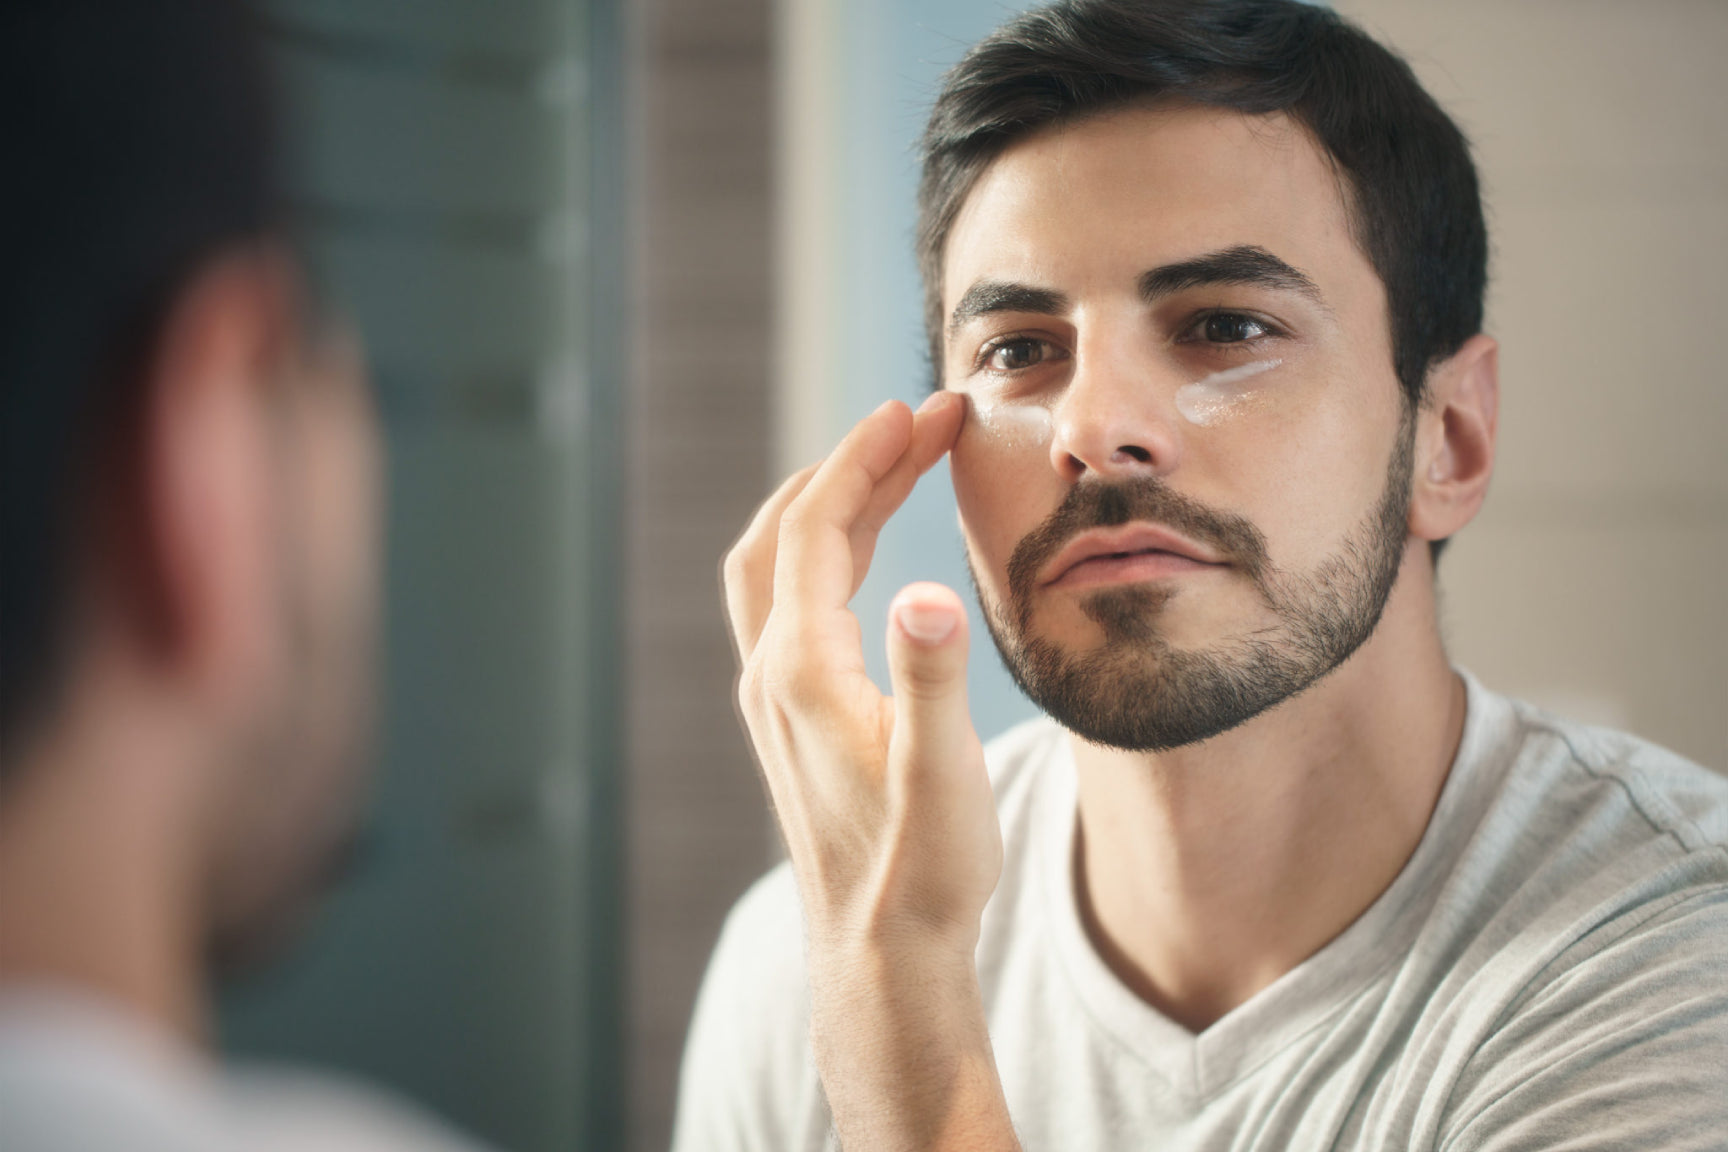 Face the Day with Confidence : Enhance Your Appearance with Men's Face Creams